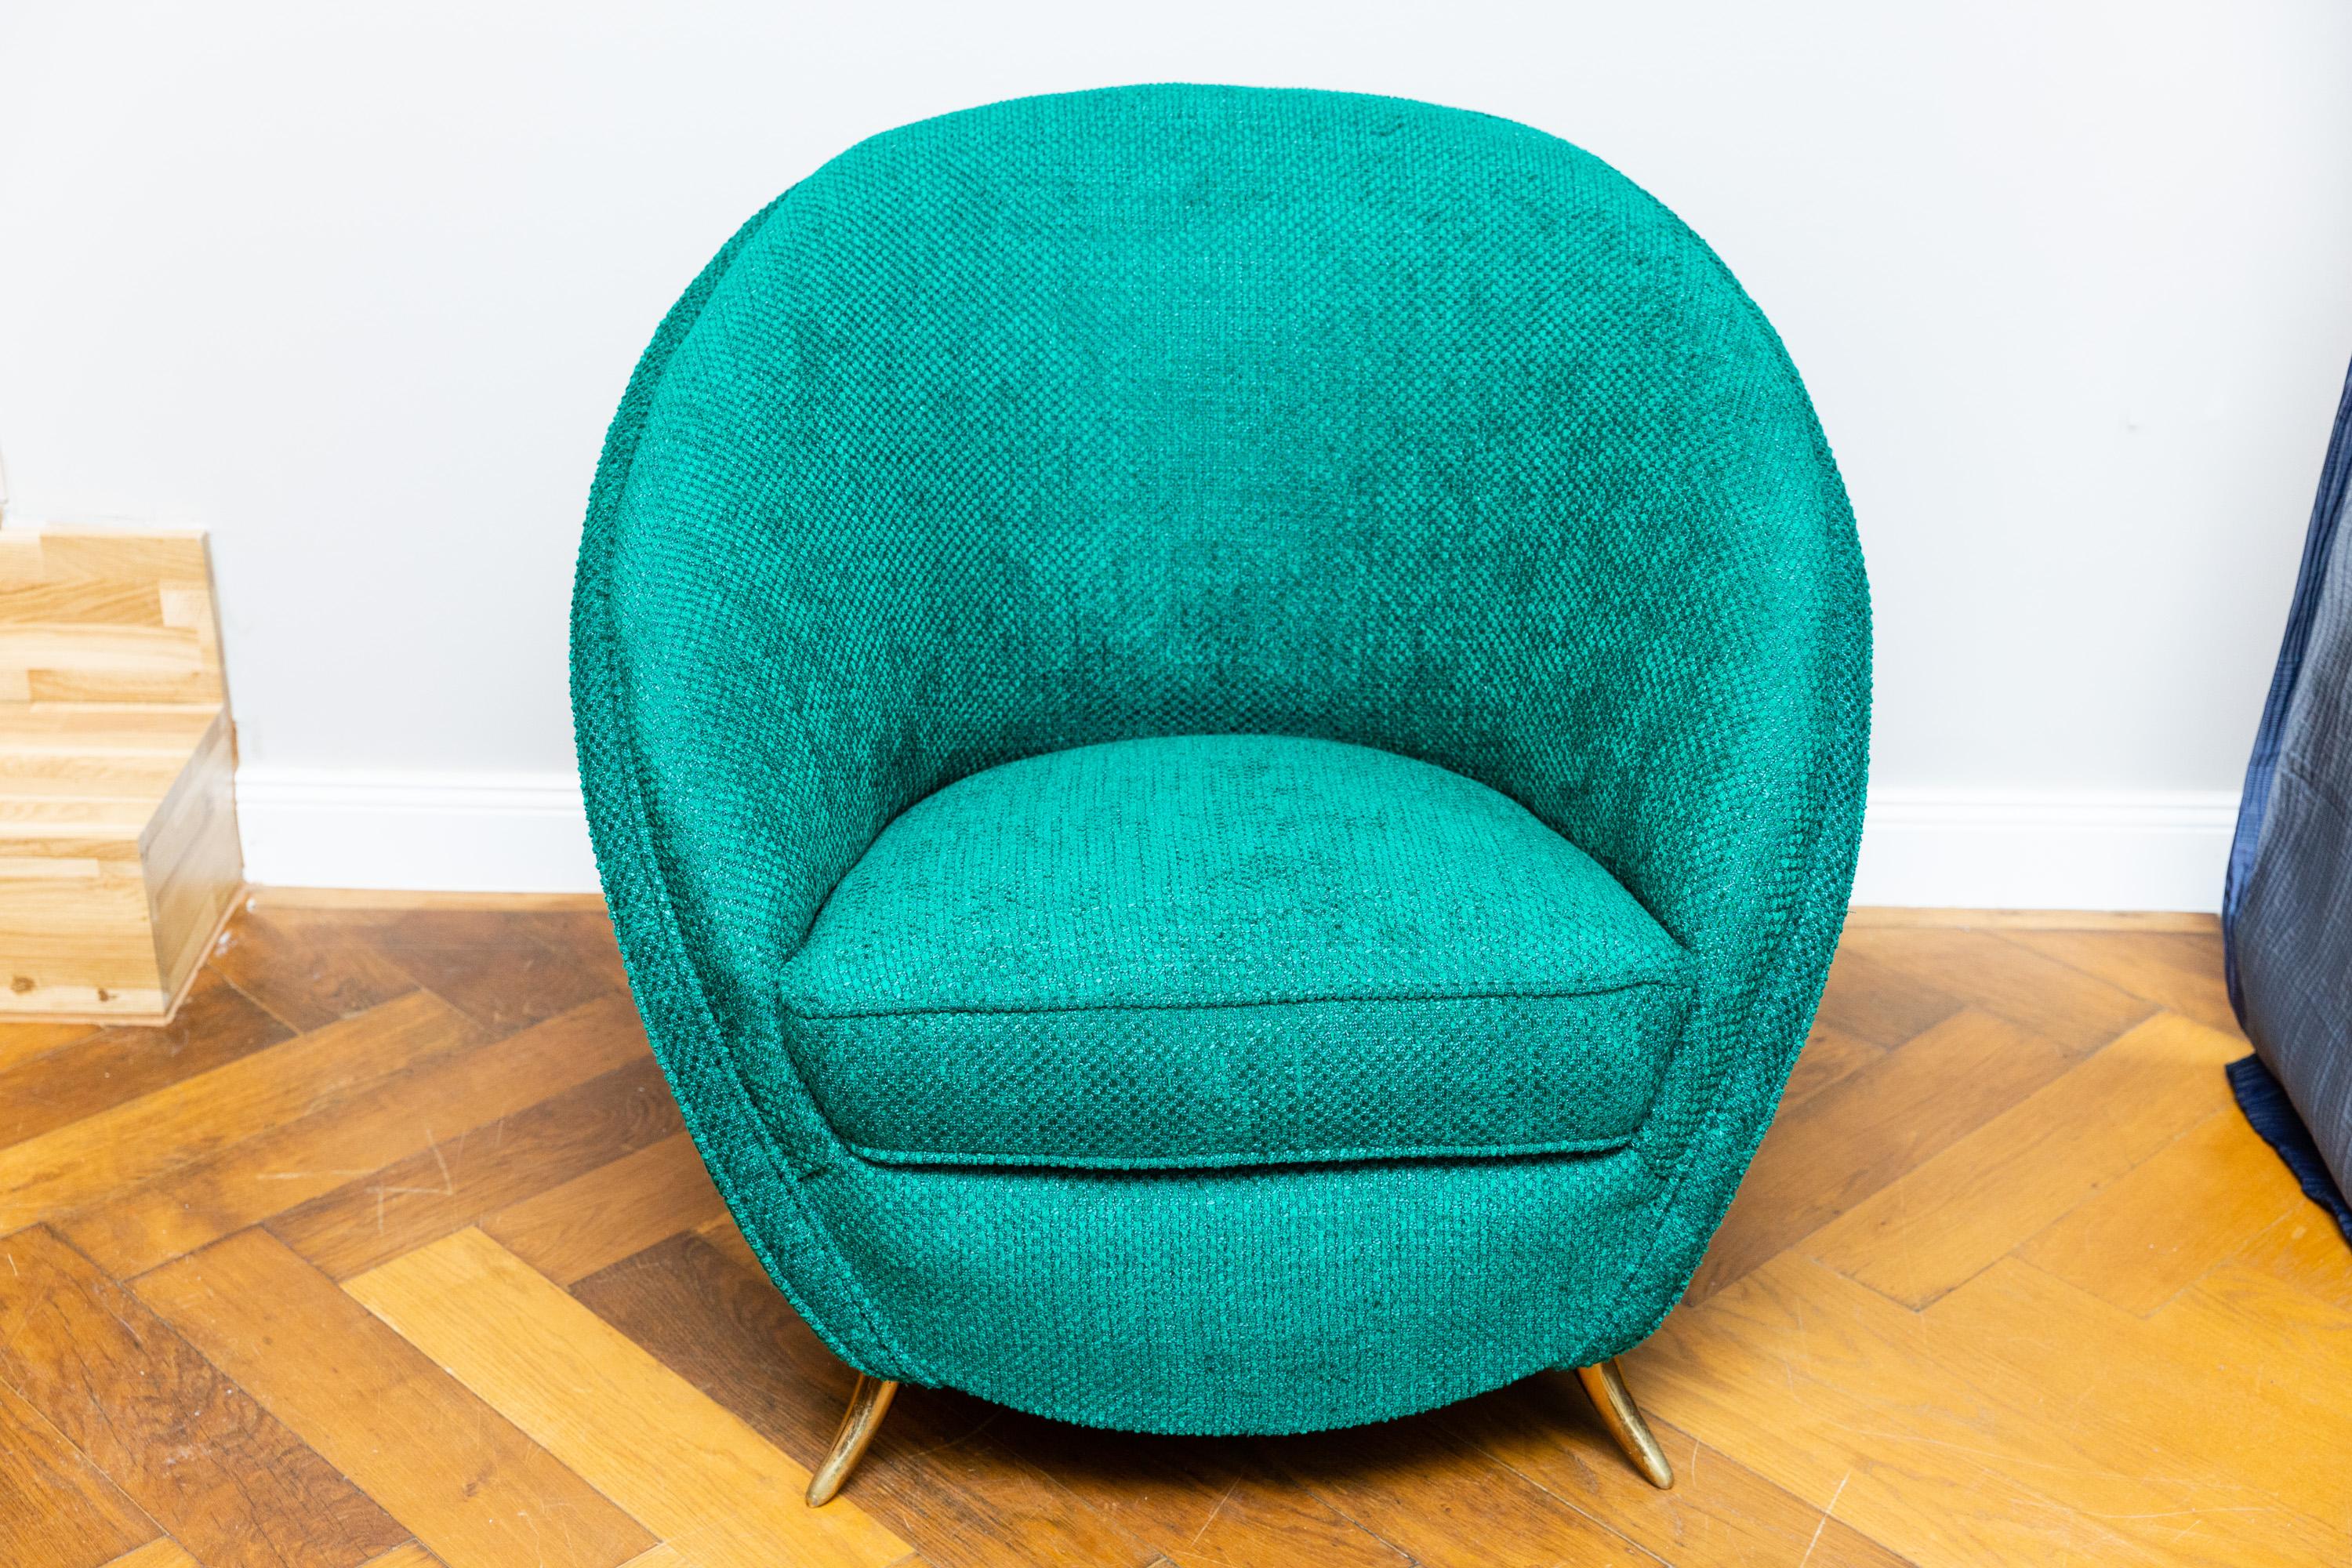 Rare armchair designed by Guglielmo Veronesi for ISA Bergamo, Italy, circa 1950. Curved back armchair with brass legs. Completely reupholstered and newly upholstered with green fabric by Designer Guild. Very good condition.
Measures: Height neck 73